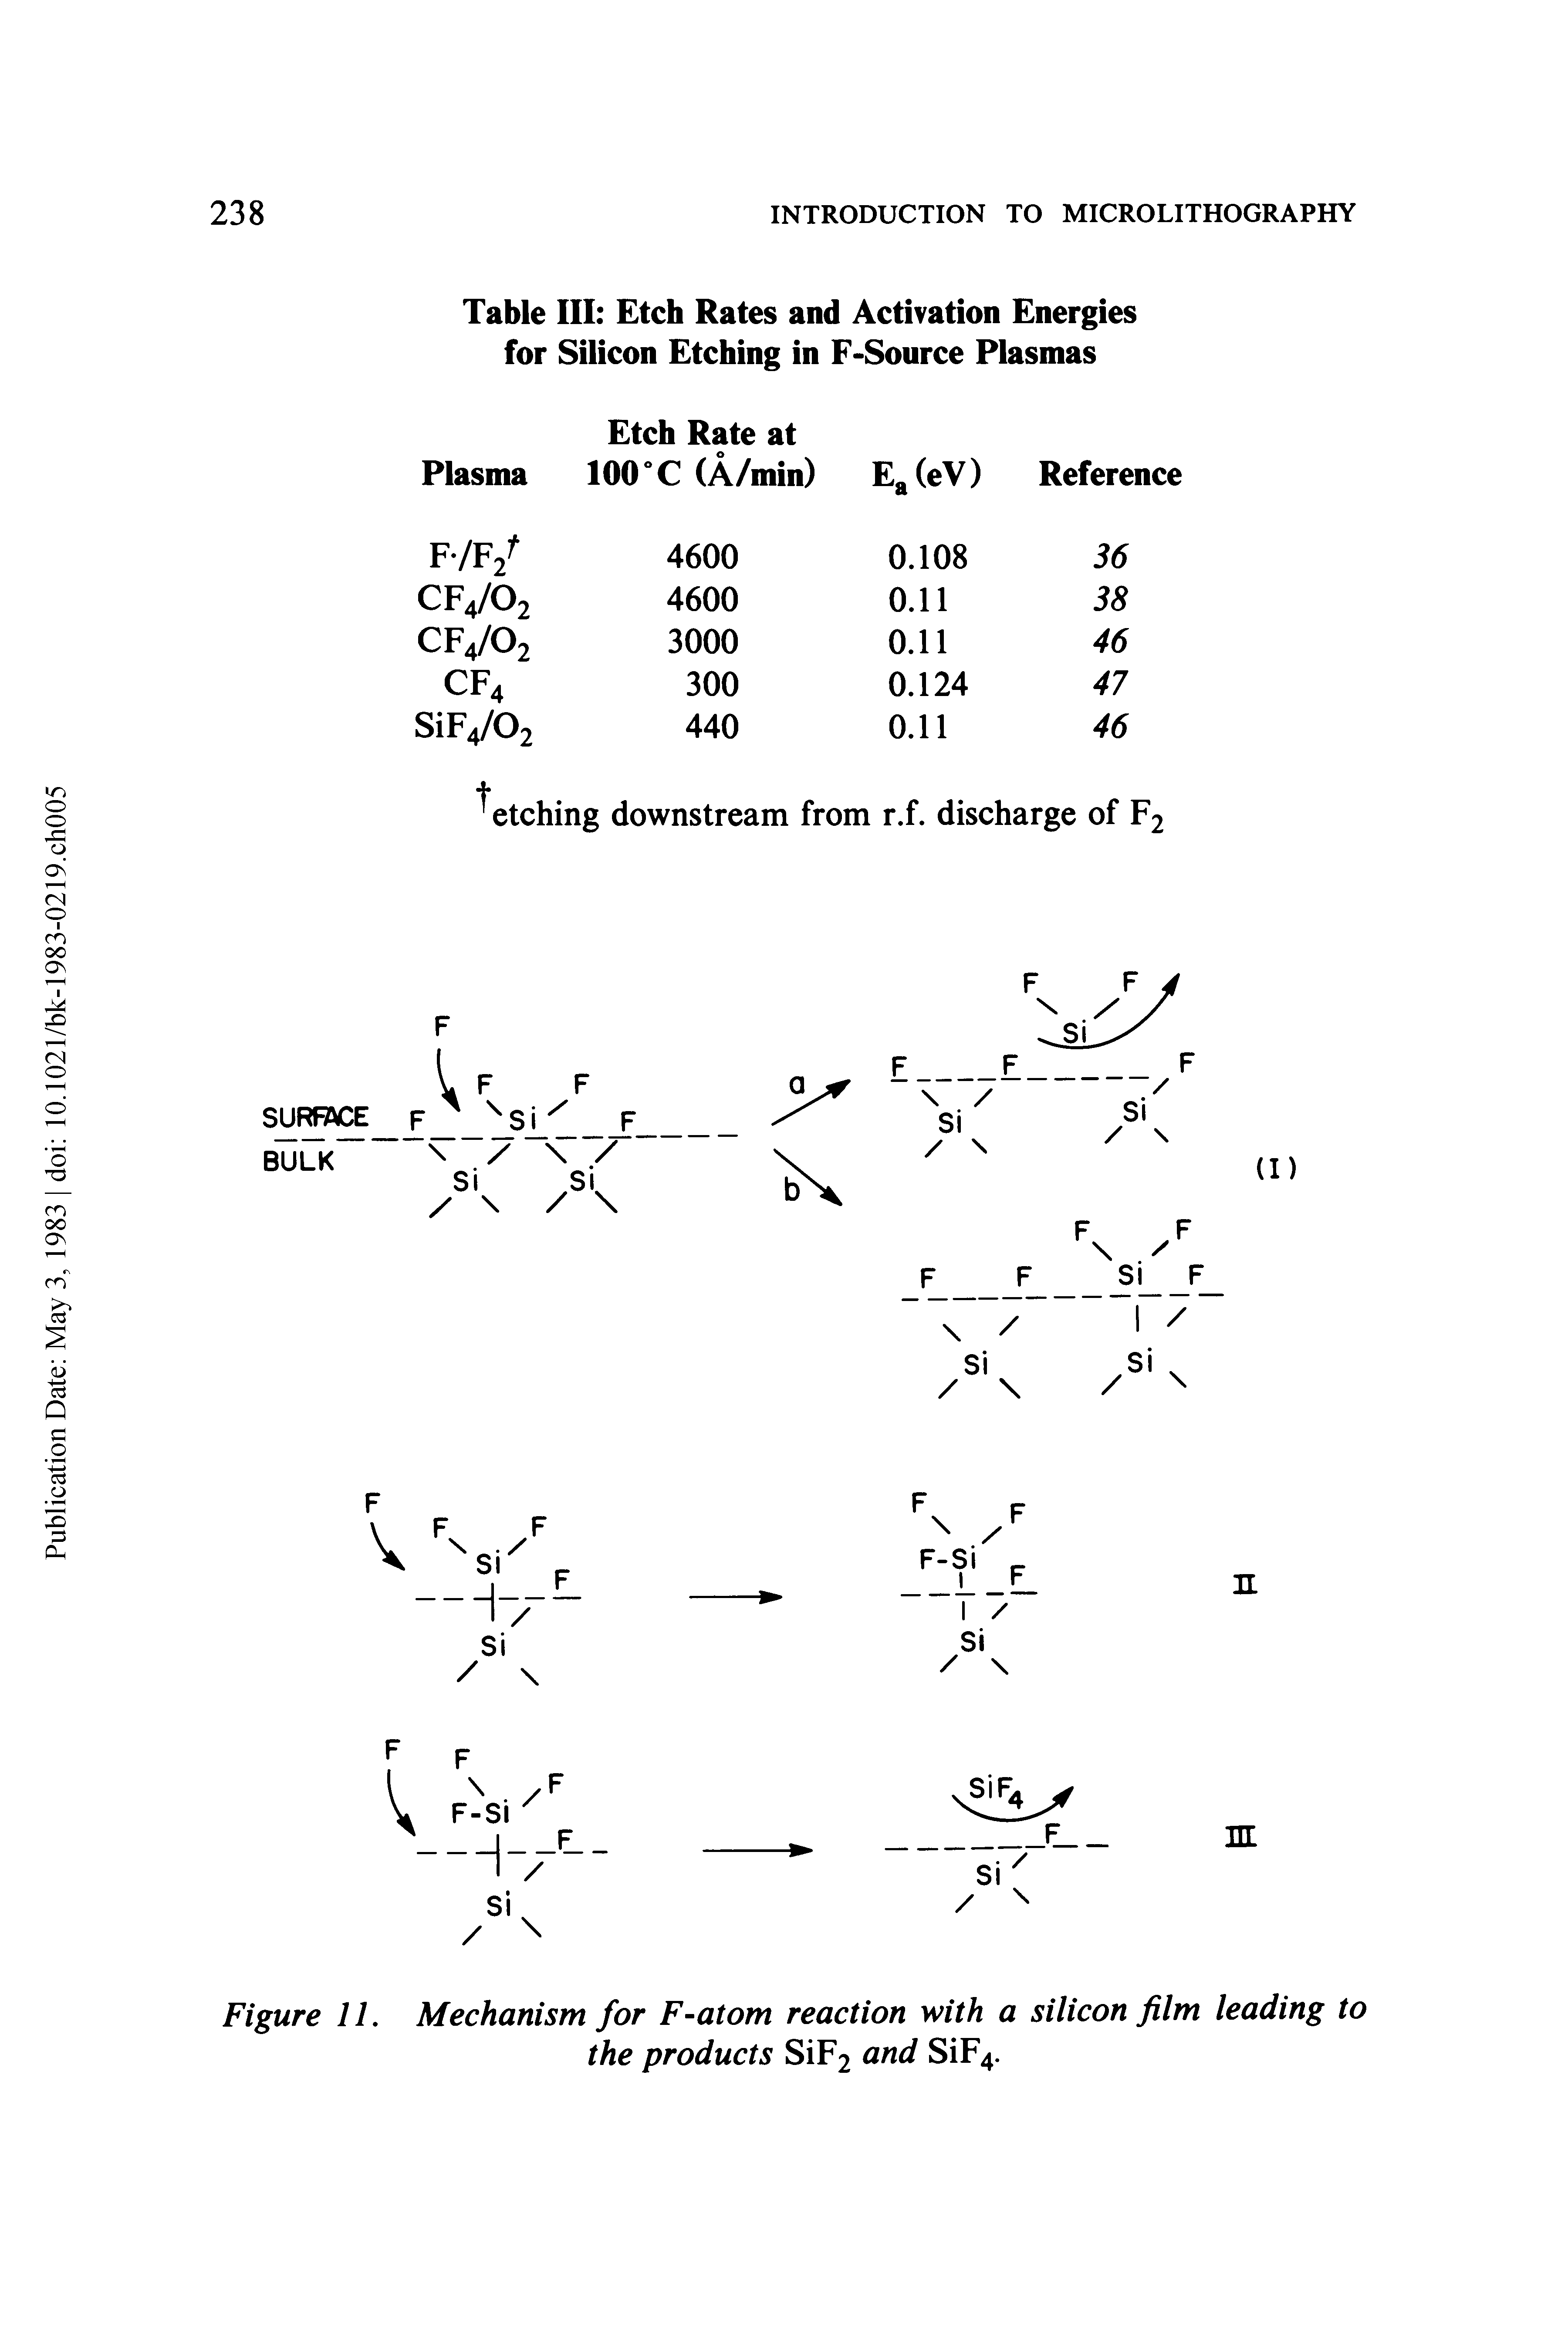 Figure 11. Mechanism for F-atom reaction with a silicon film leading to the products Sip2 and Sip4.